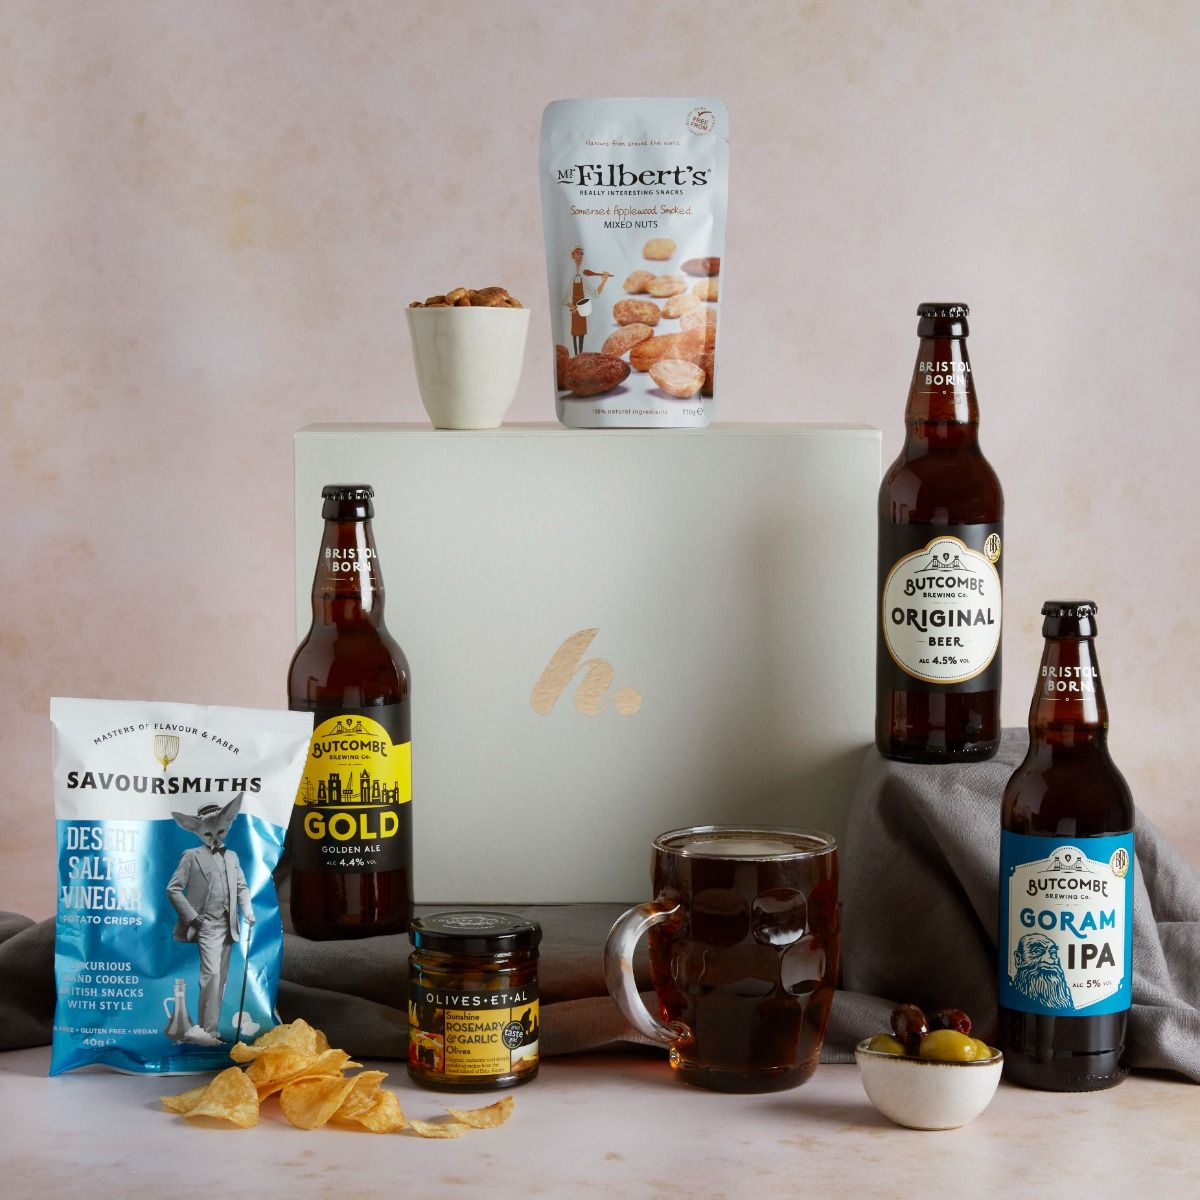 Valentine's Real Ale Gift and Snacks hamper with contents on display